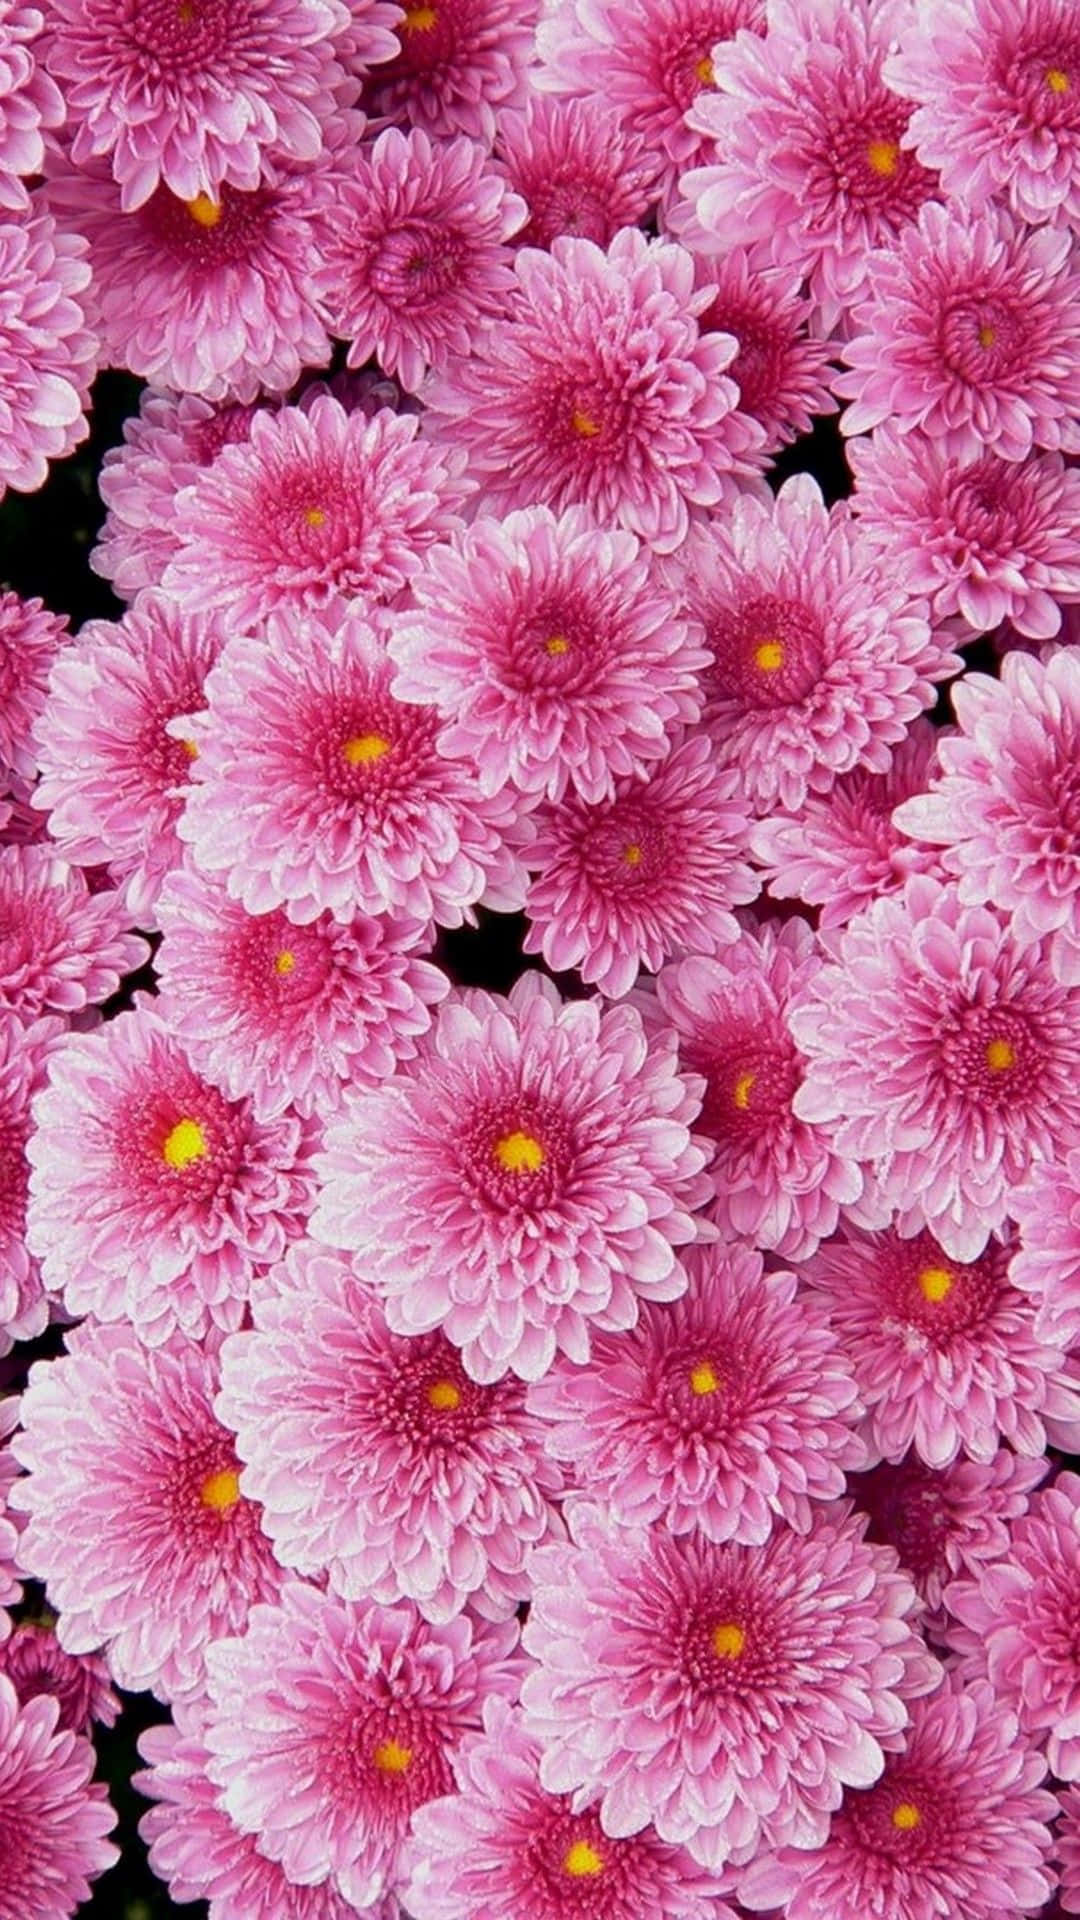 Perfectly Framed: An Up-Close Look at a Pink Flower Wallpaper